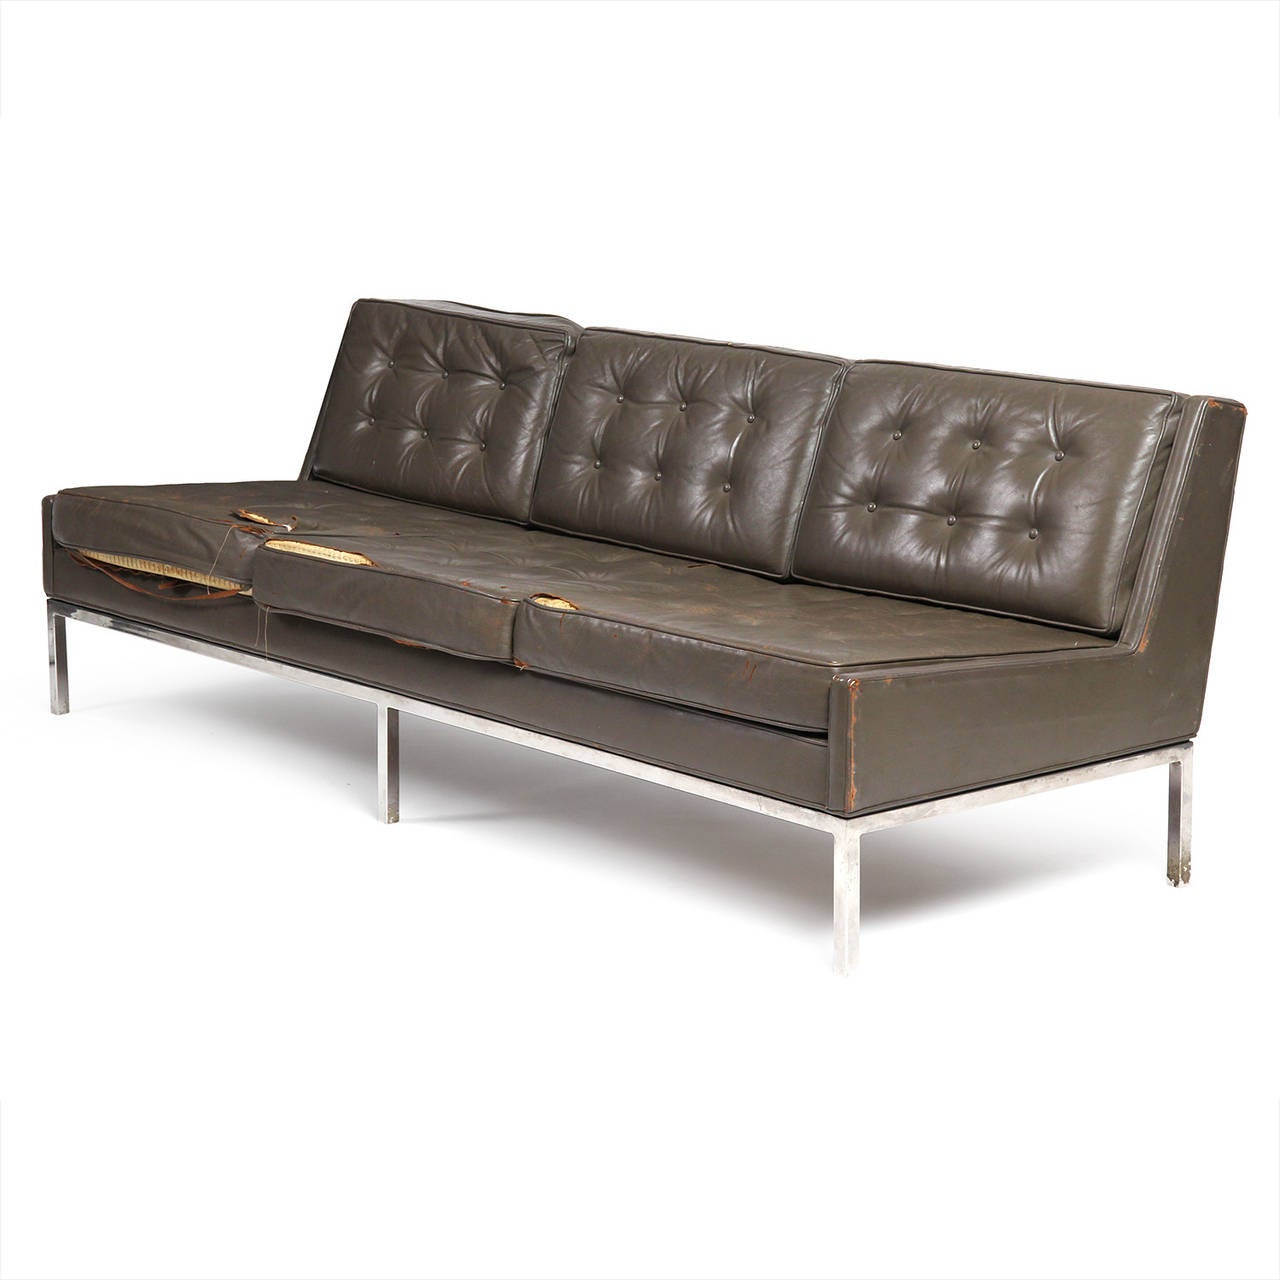 An uncommon, arm less three seat sofa with tufted leather cushions having a spare and architectural chromed steel six legged base. Still in original leather.